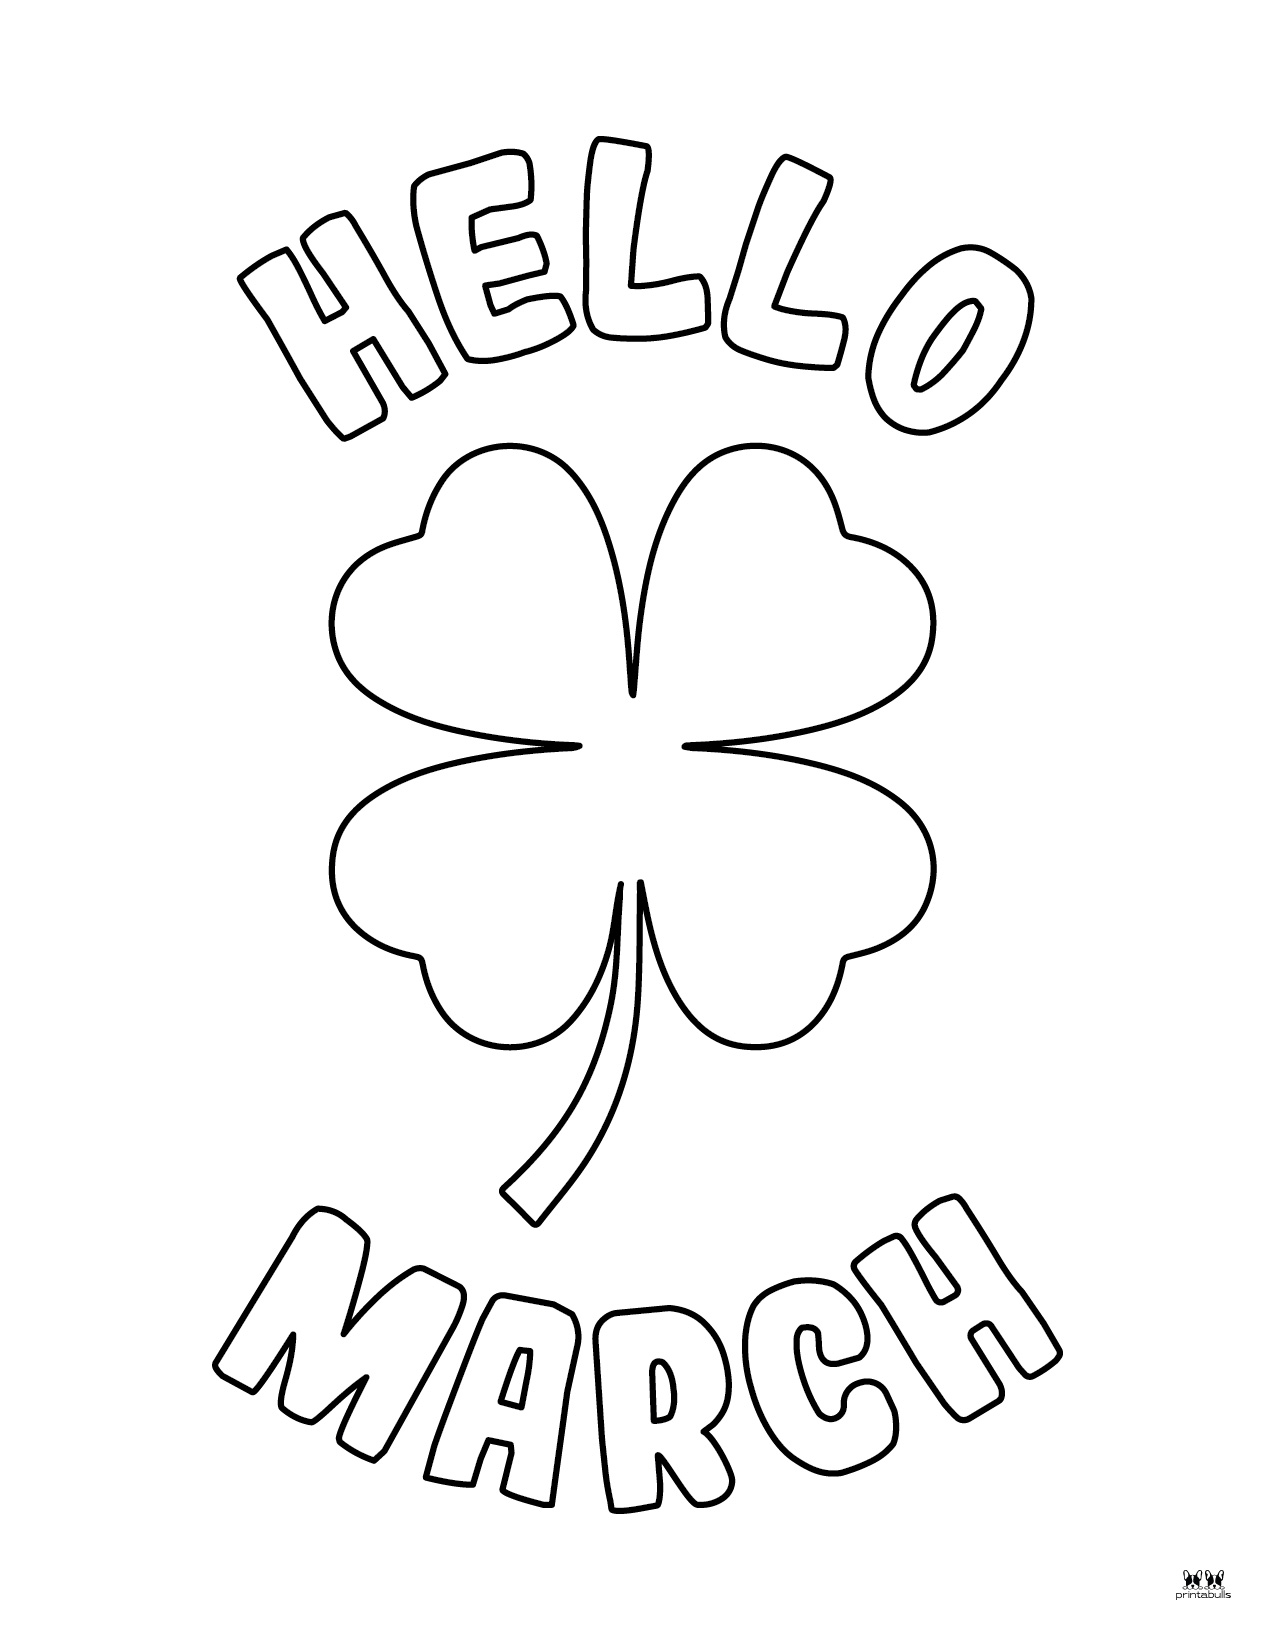 March Coloring Pages - 25 FREE Printable Pages | Printabulls